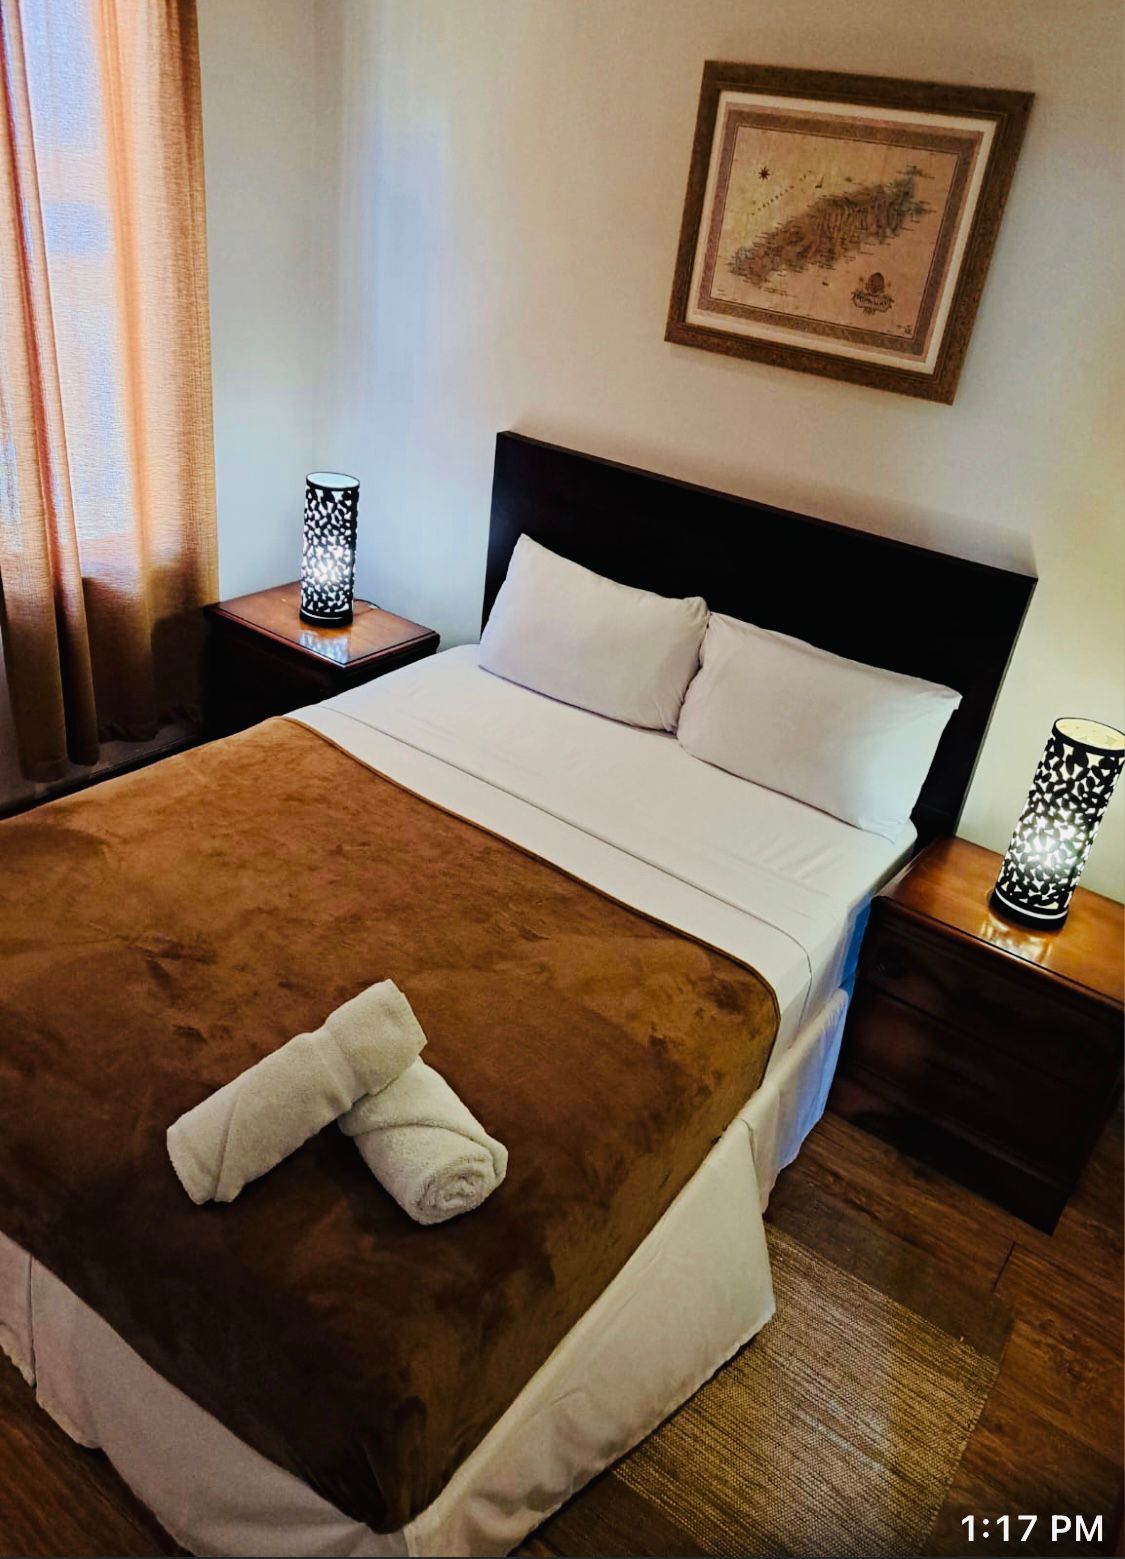 Placid Superior suite $116 USD per night with breakfast double/single occupancy Queen size bed